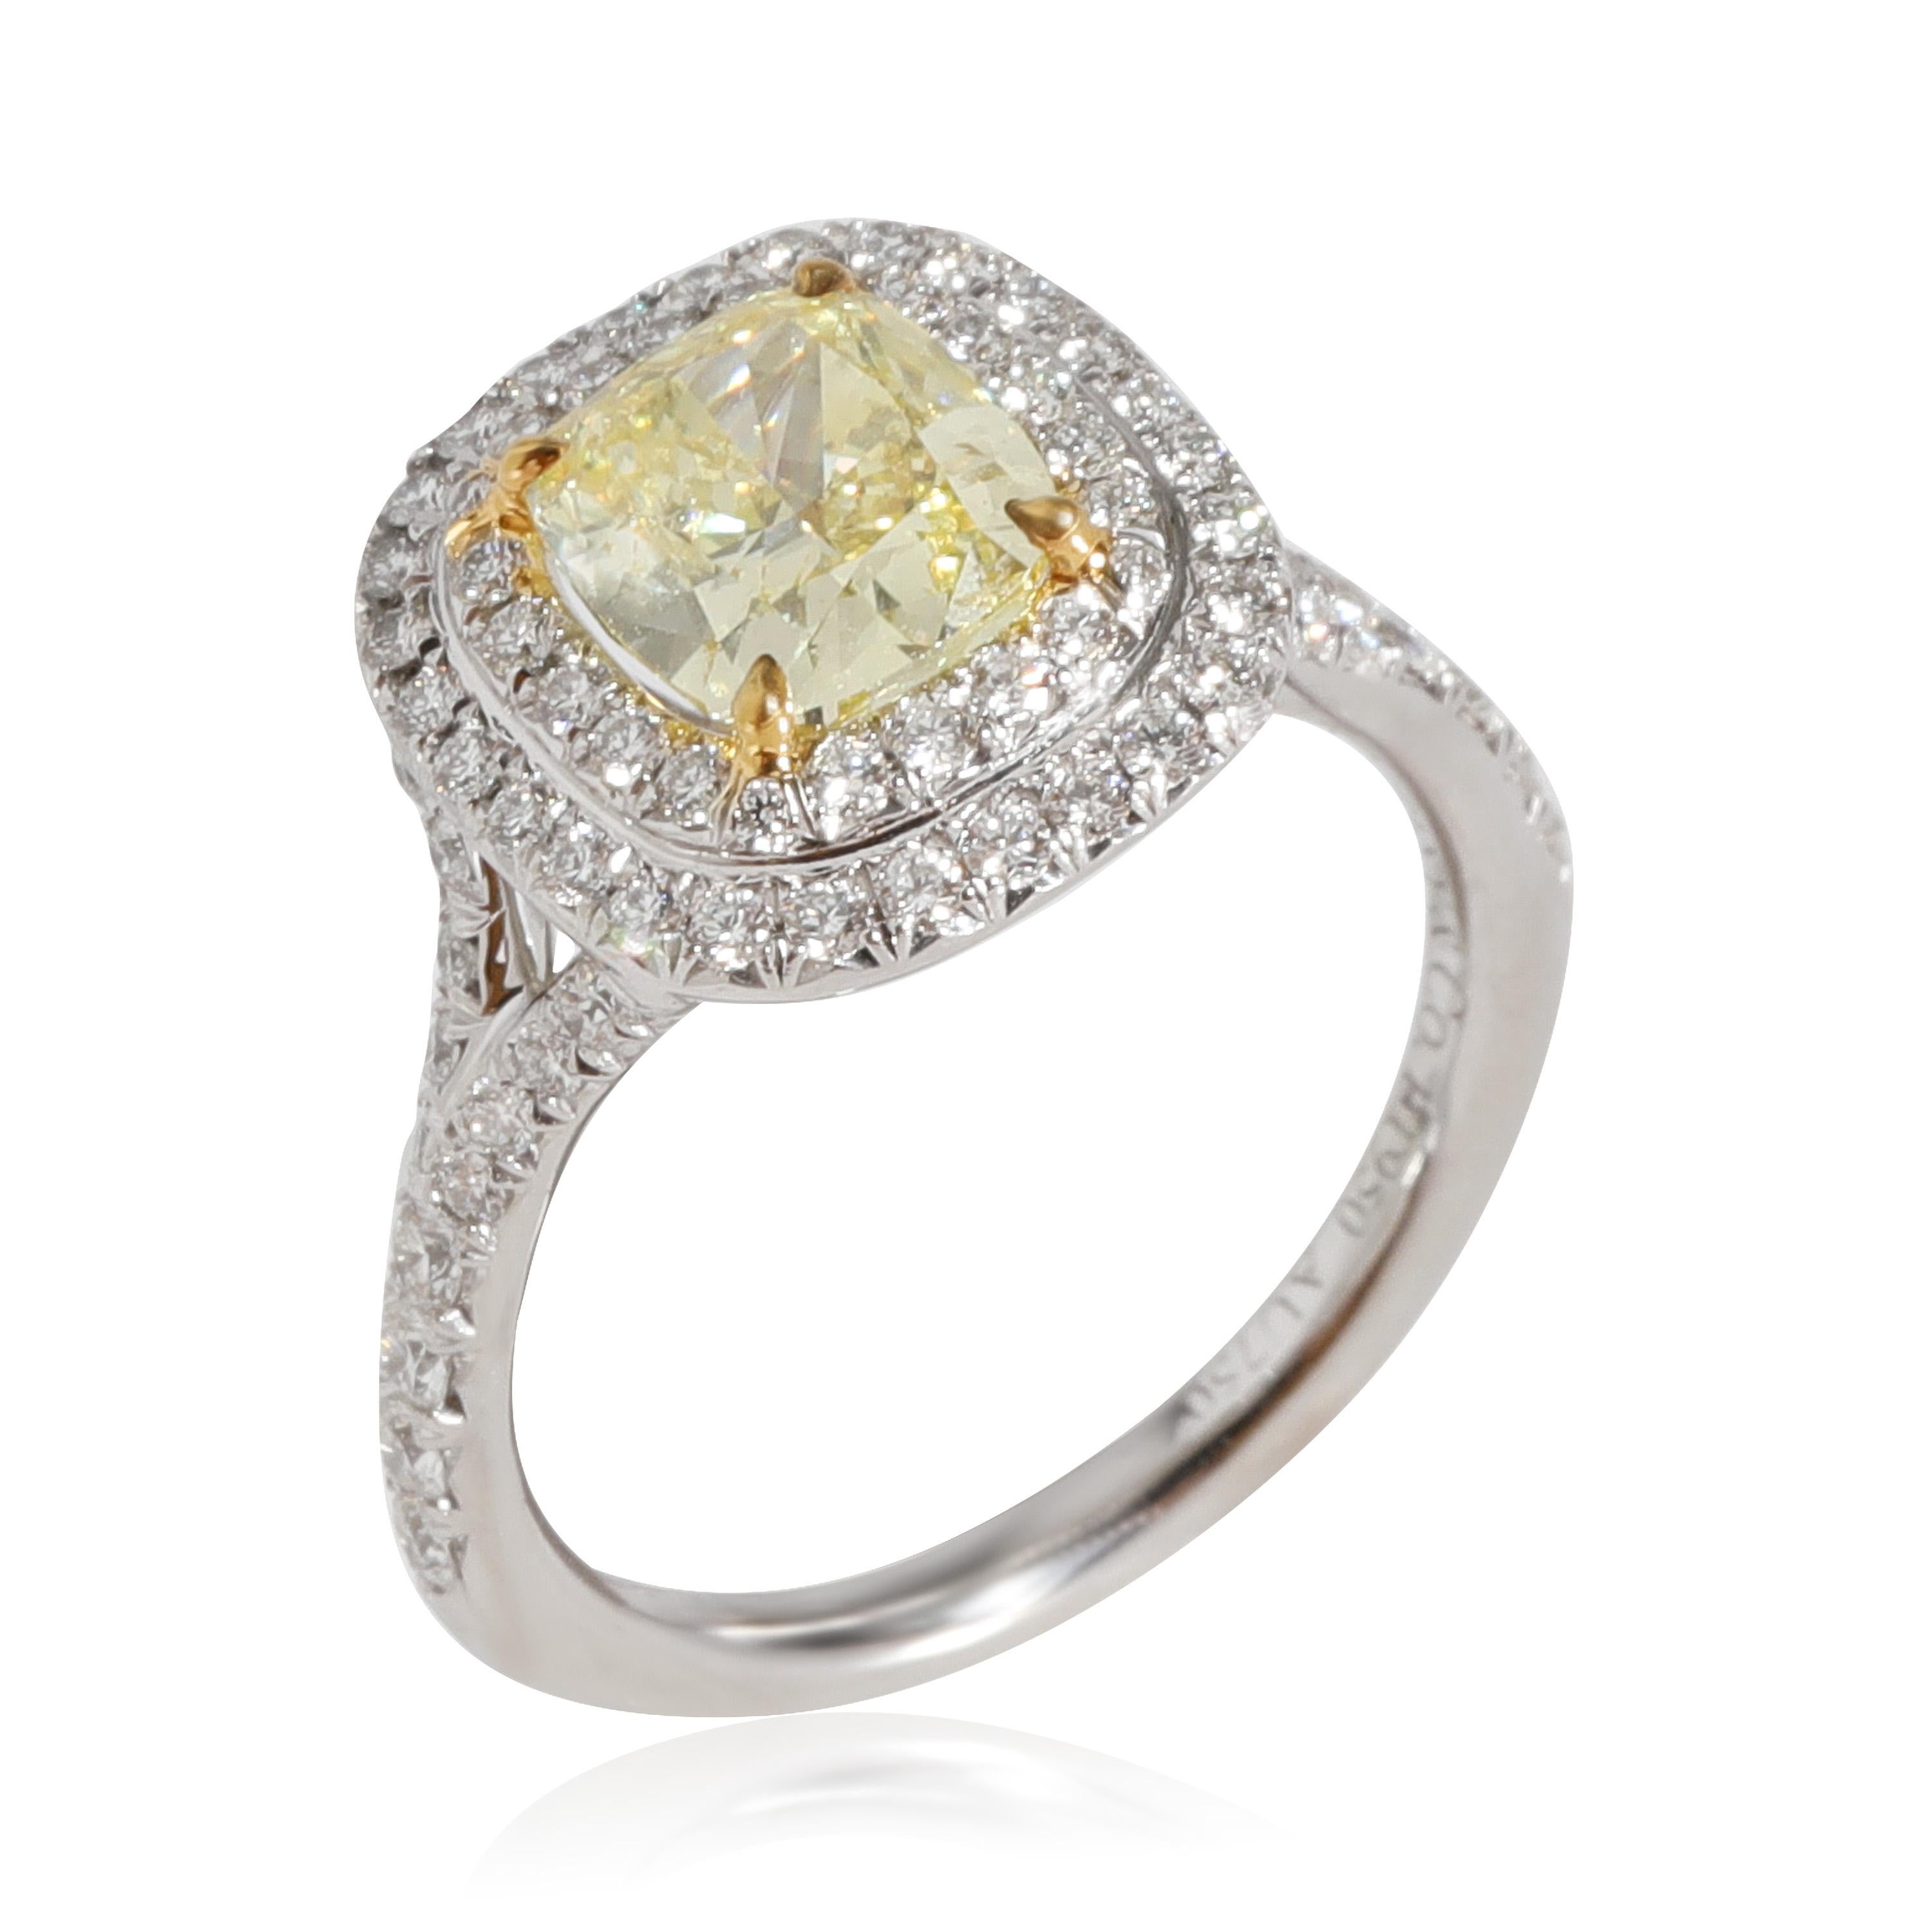 Tiffany & Co. Soleste Diamond  Ring in 18KYG/Plat Fancy Yellow 1.55 CTW

PRIMARY DETAILS
SKU: 122420
Listing Title: Tiffany & Co. Soleste Diamond  Ring in 18KYG/Plat Fancy Yellow 1.55 CTW
Condition Description: Retails for 17500 USD. In excellent